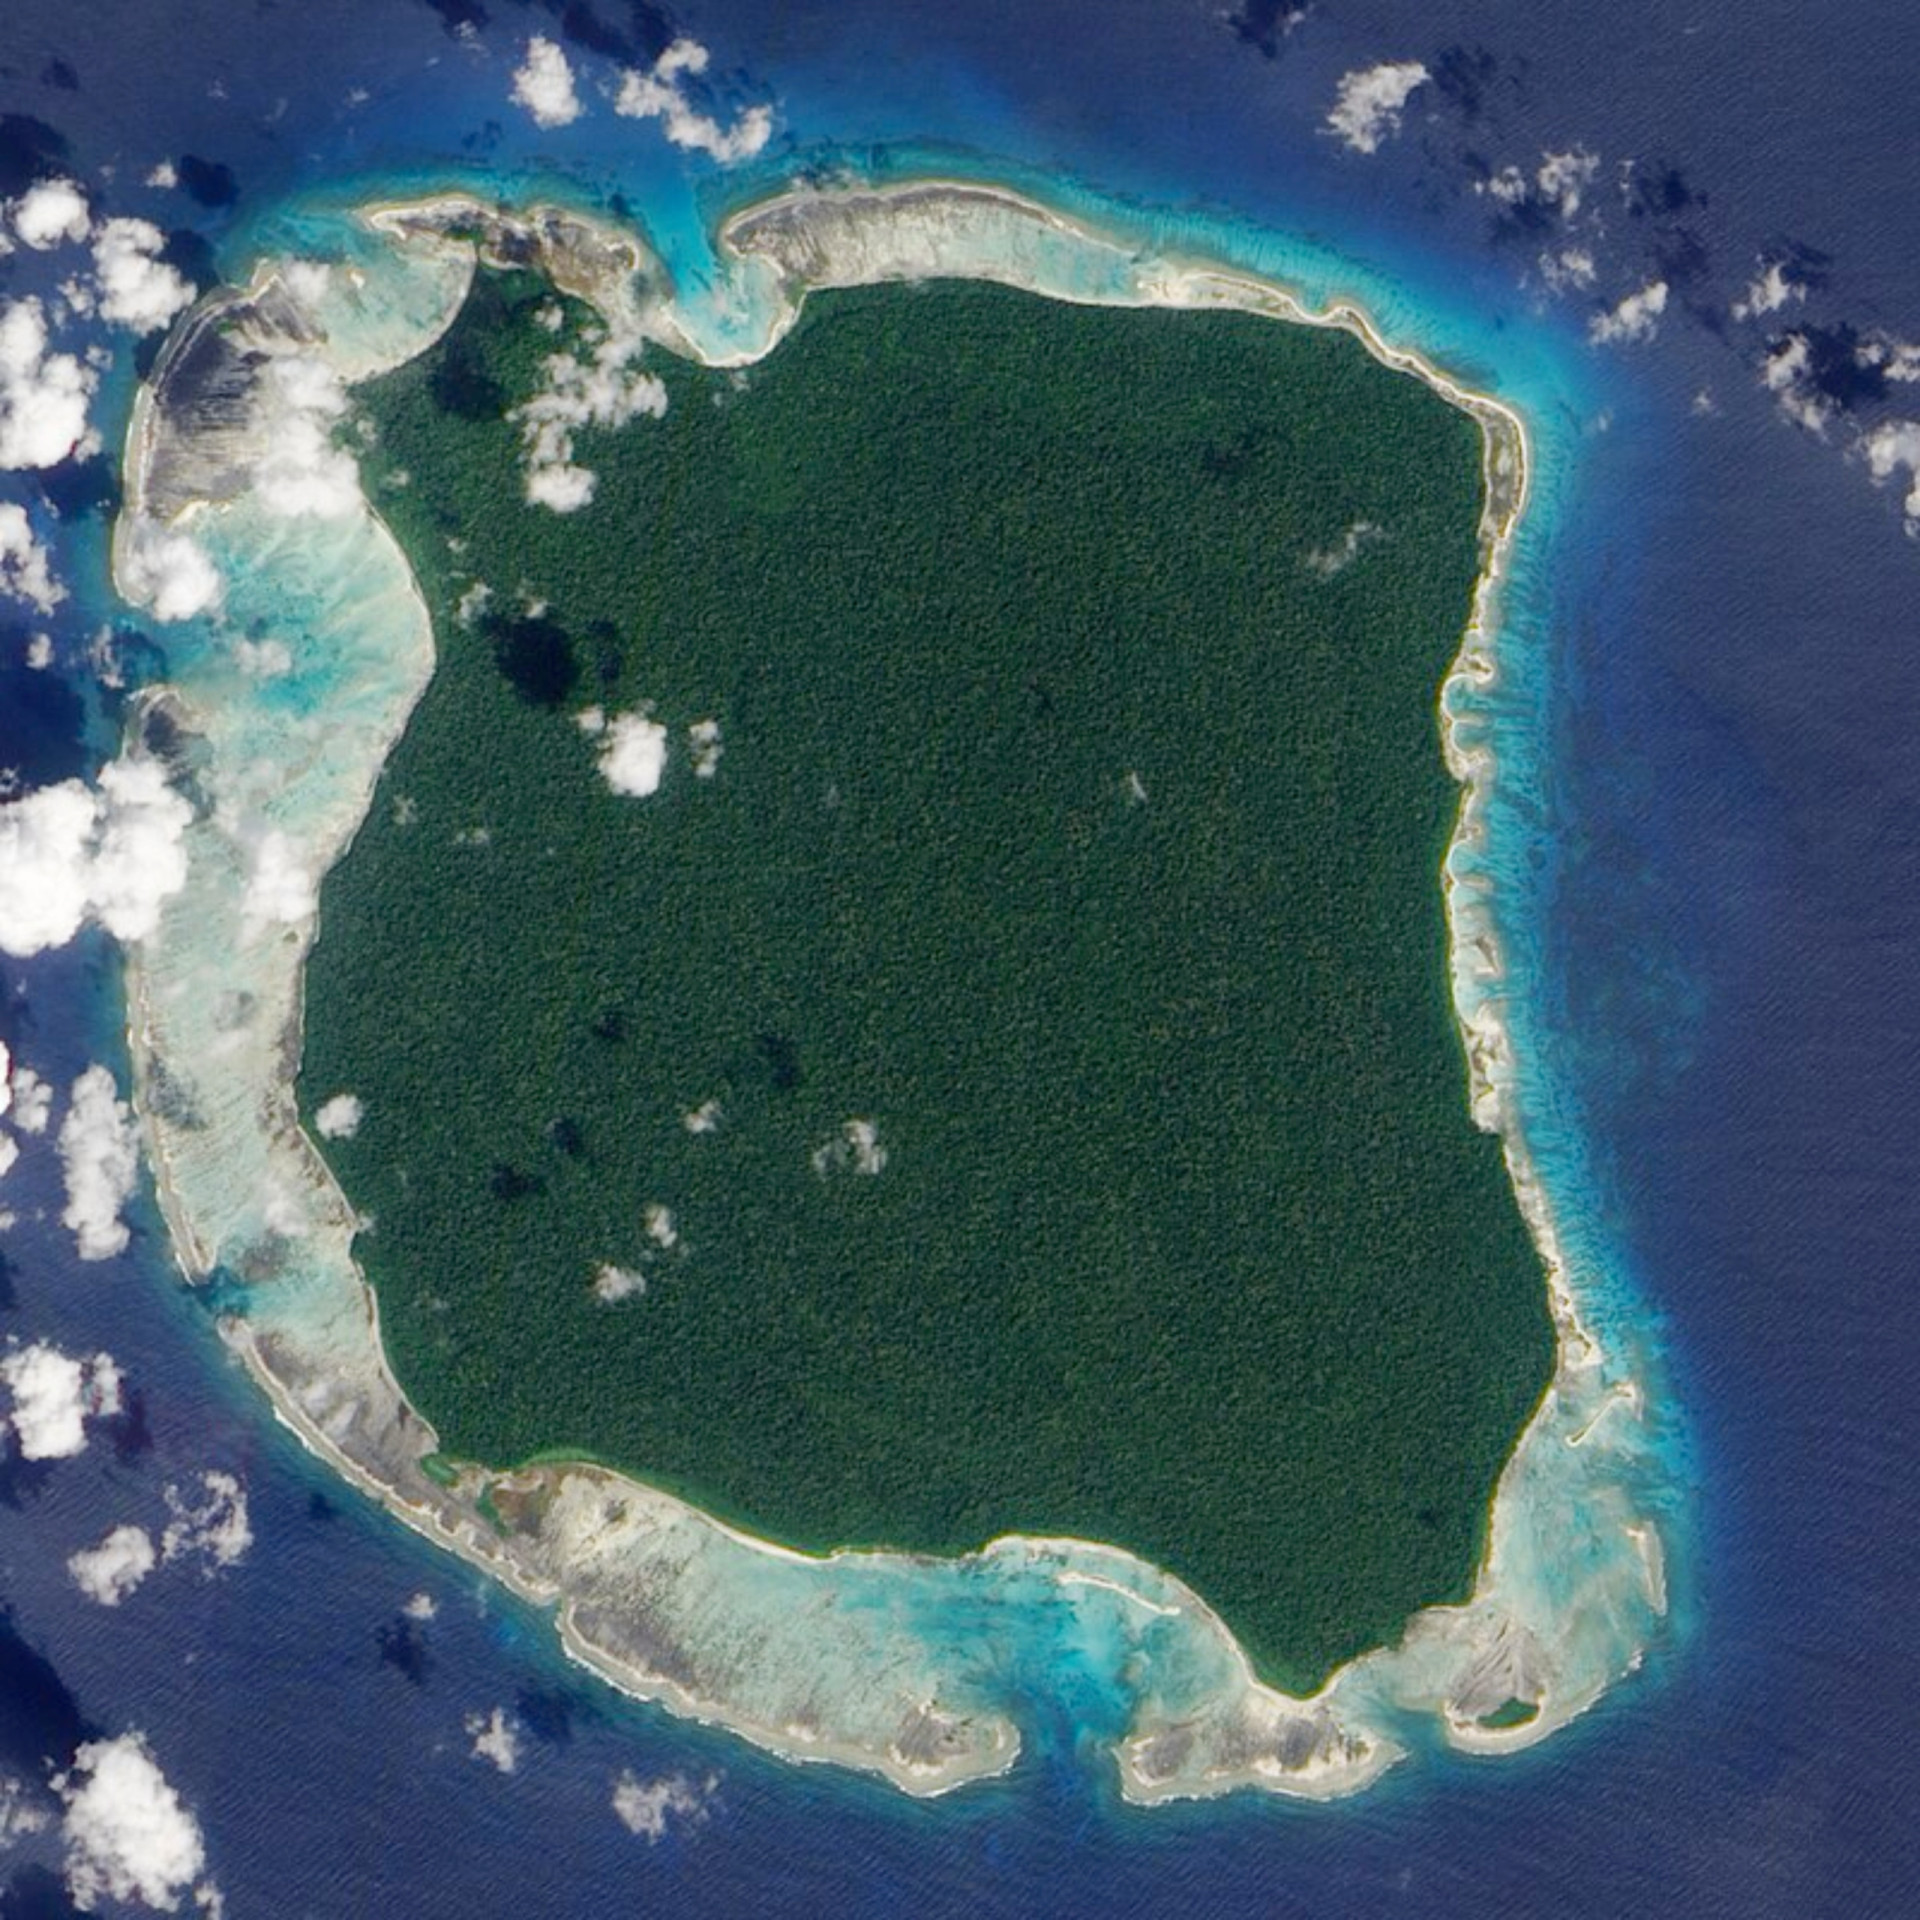 <p>North Sentinel Island is one of the Andaman Islands. It's home to the Sentinelese, an isolated indigenous people fiercely protective of their island refuge. In fact, they are hostile to outsiders and have killed people who approached or landed on the island. In 2018, an American tourist was murdered while attempting to make contact with the community.</p><p>You may also like:<a href="https://www.starsinsider.com/n/233723?utm_source=msn.com&utm_medium=display&utm_campaign=referral_description&utm_content=689150en-nz"> Ridiculous products you won't believe actually exist</a></p>